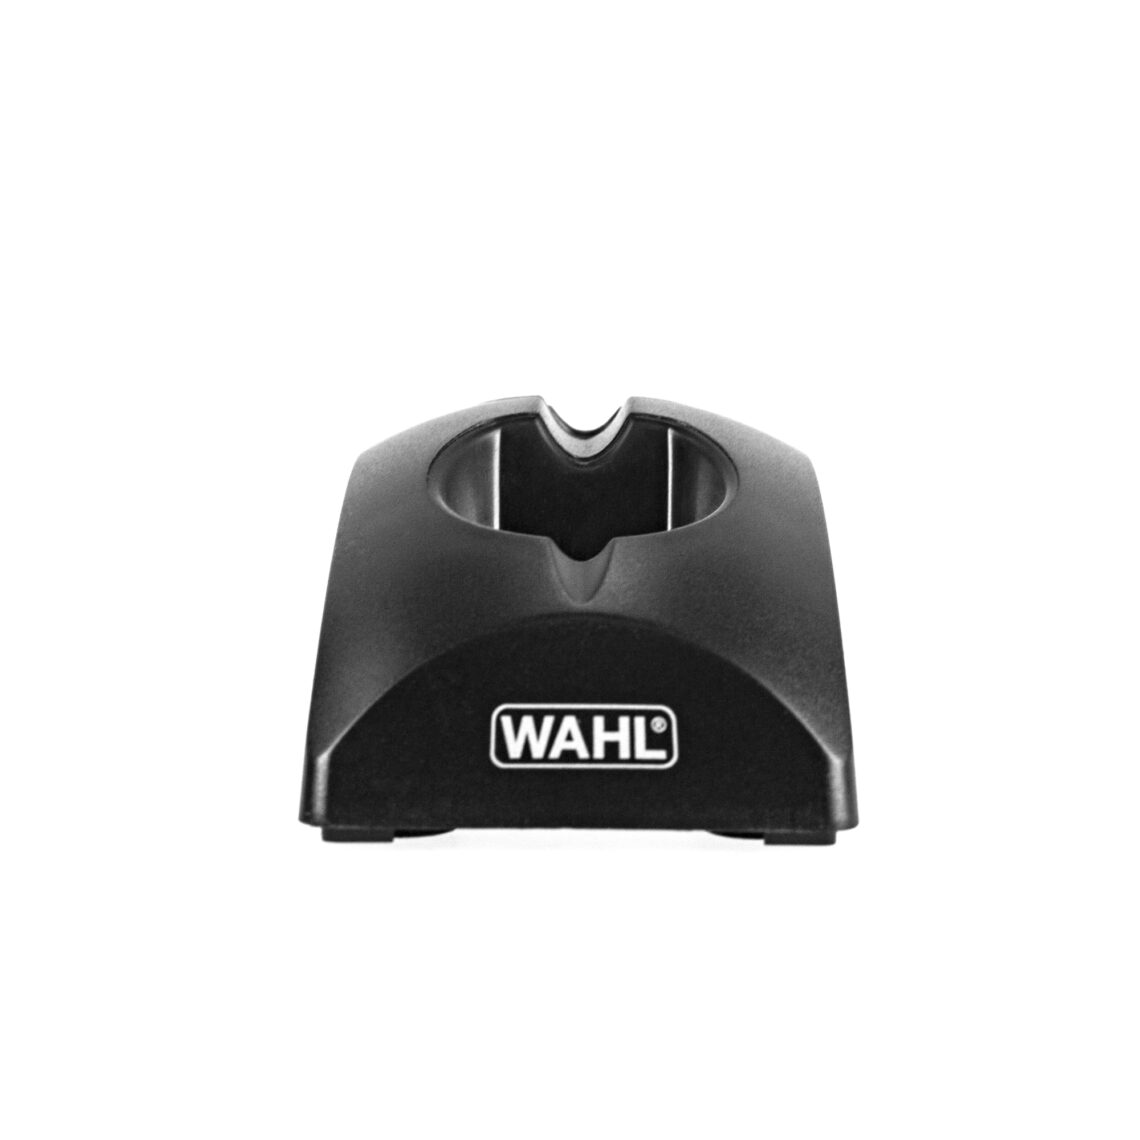 wahl shaver not charging